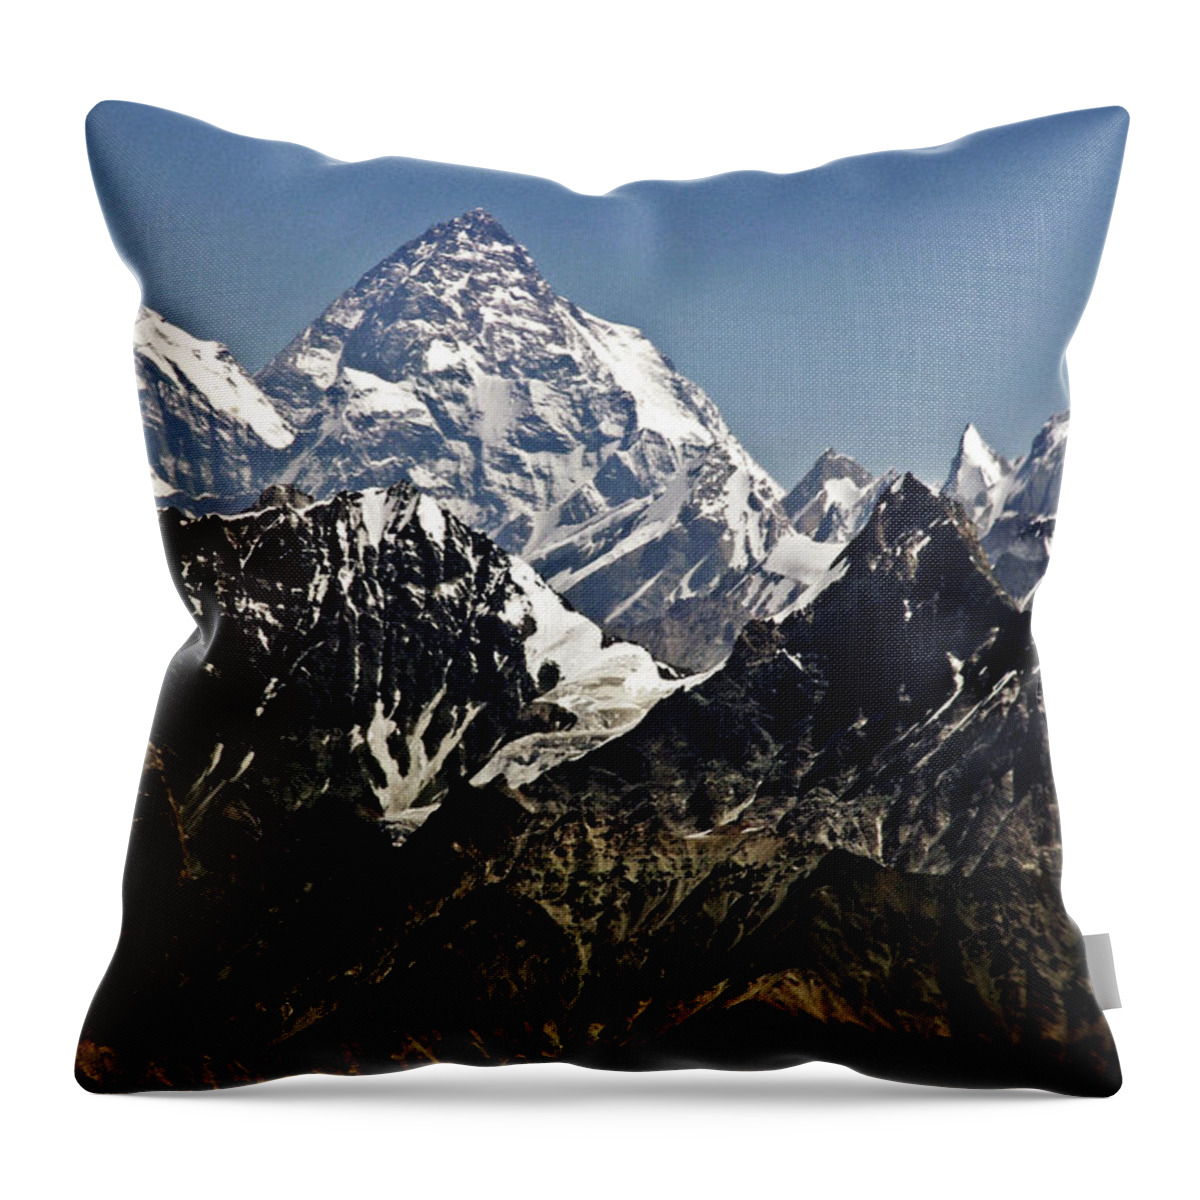 Tranquility Throw Pillow featuring the photograph K2 Mountain by Sylwia Duda